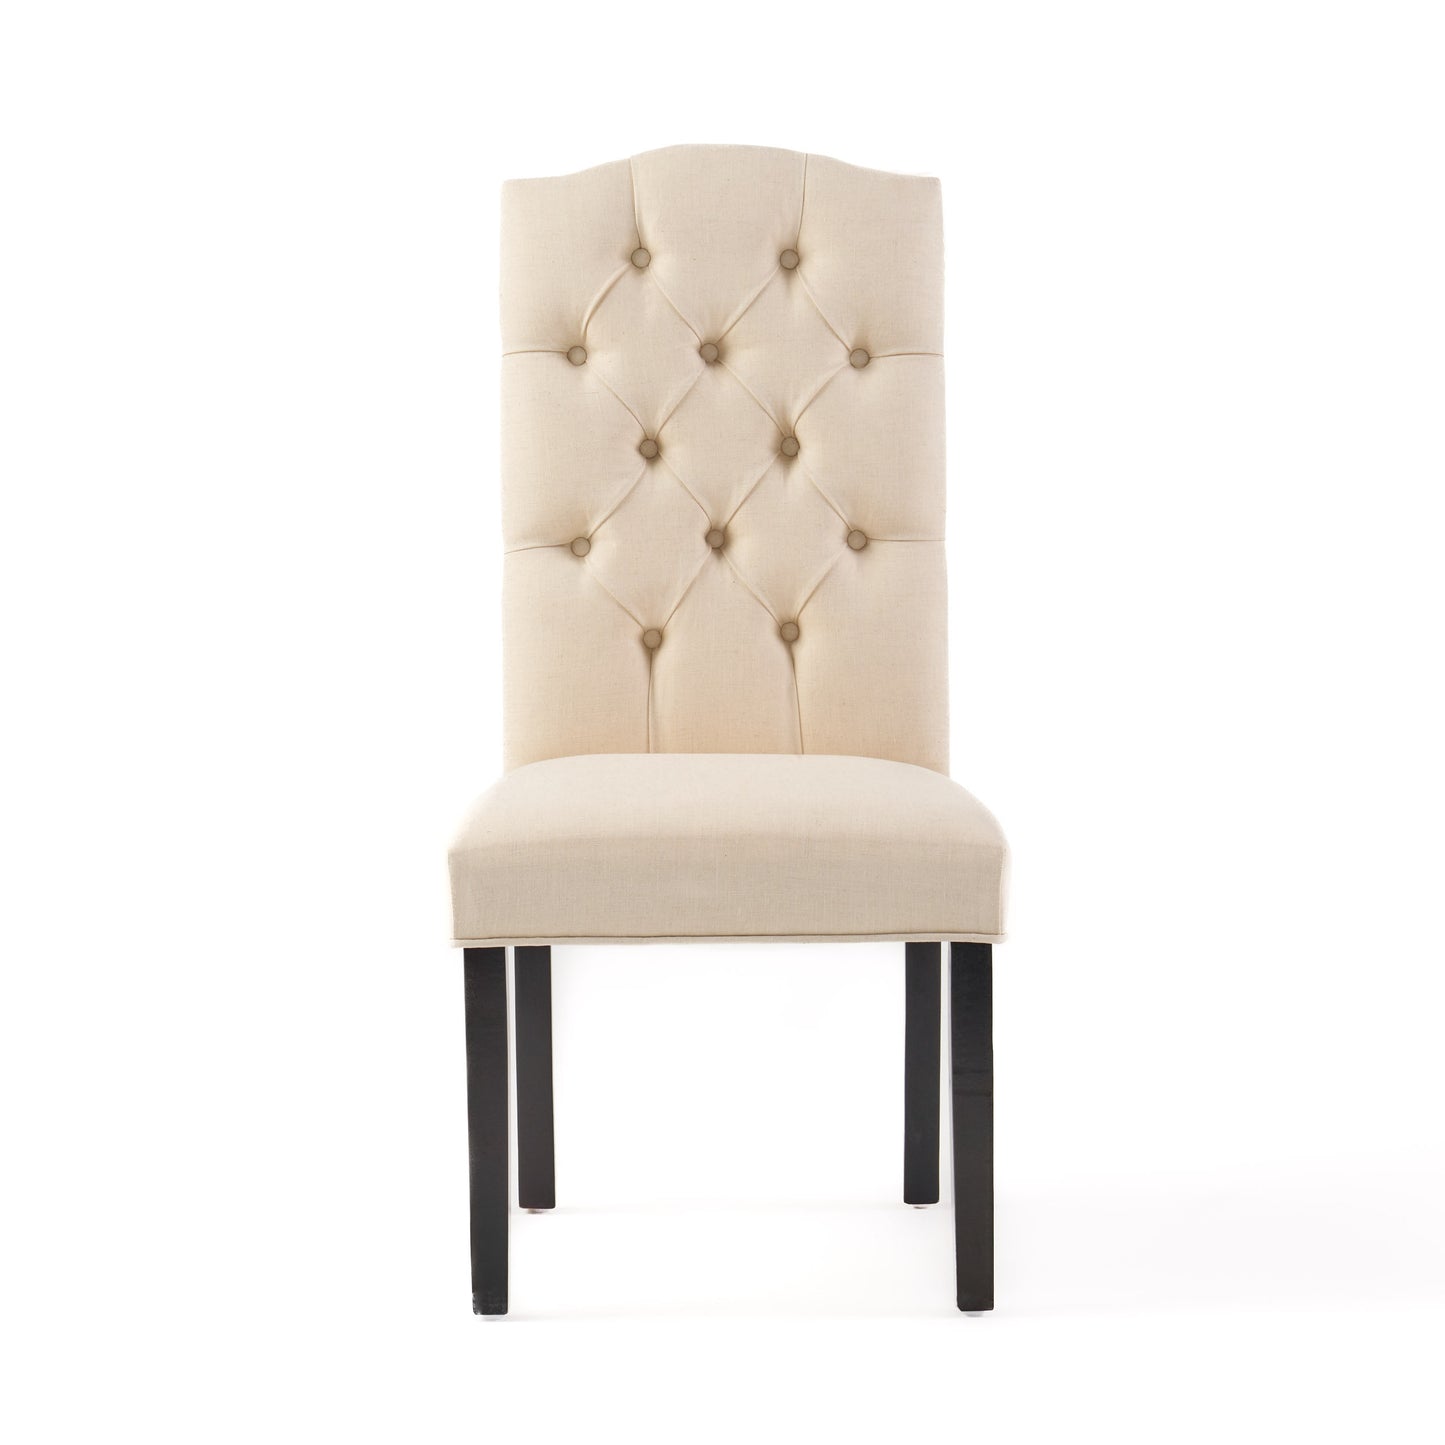 Clark Button Tufted Fabric Dining Chair with Tapered Legs, Set of 2